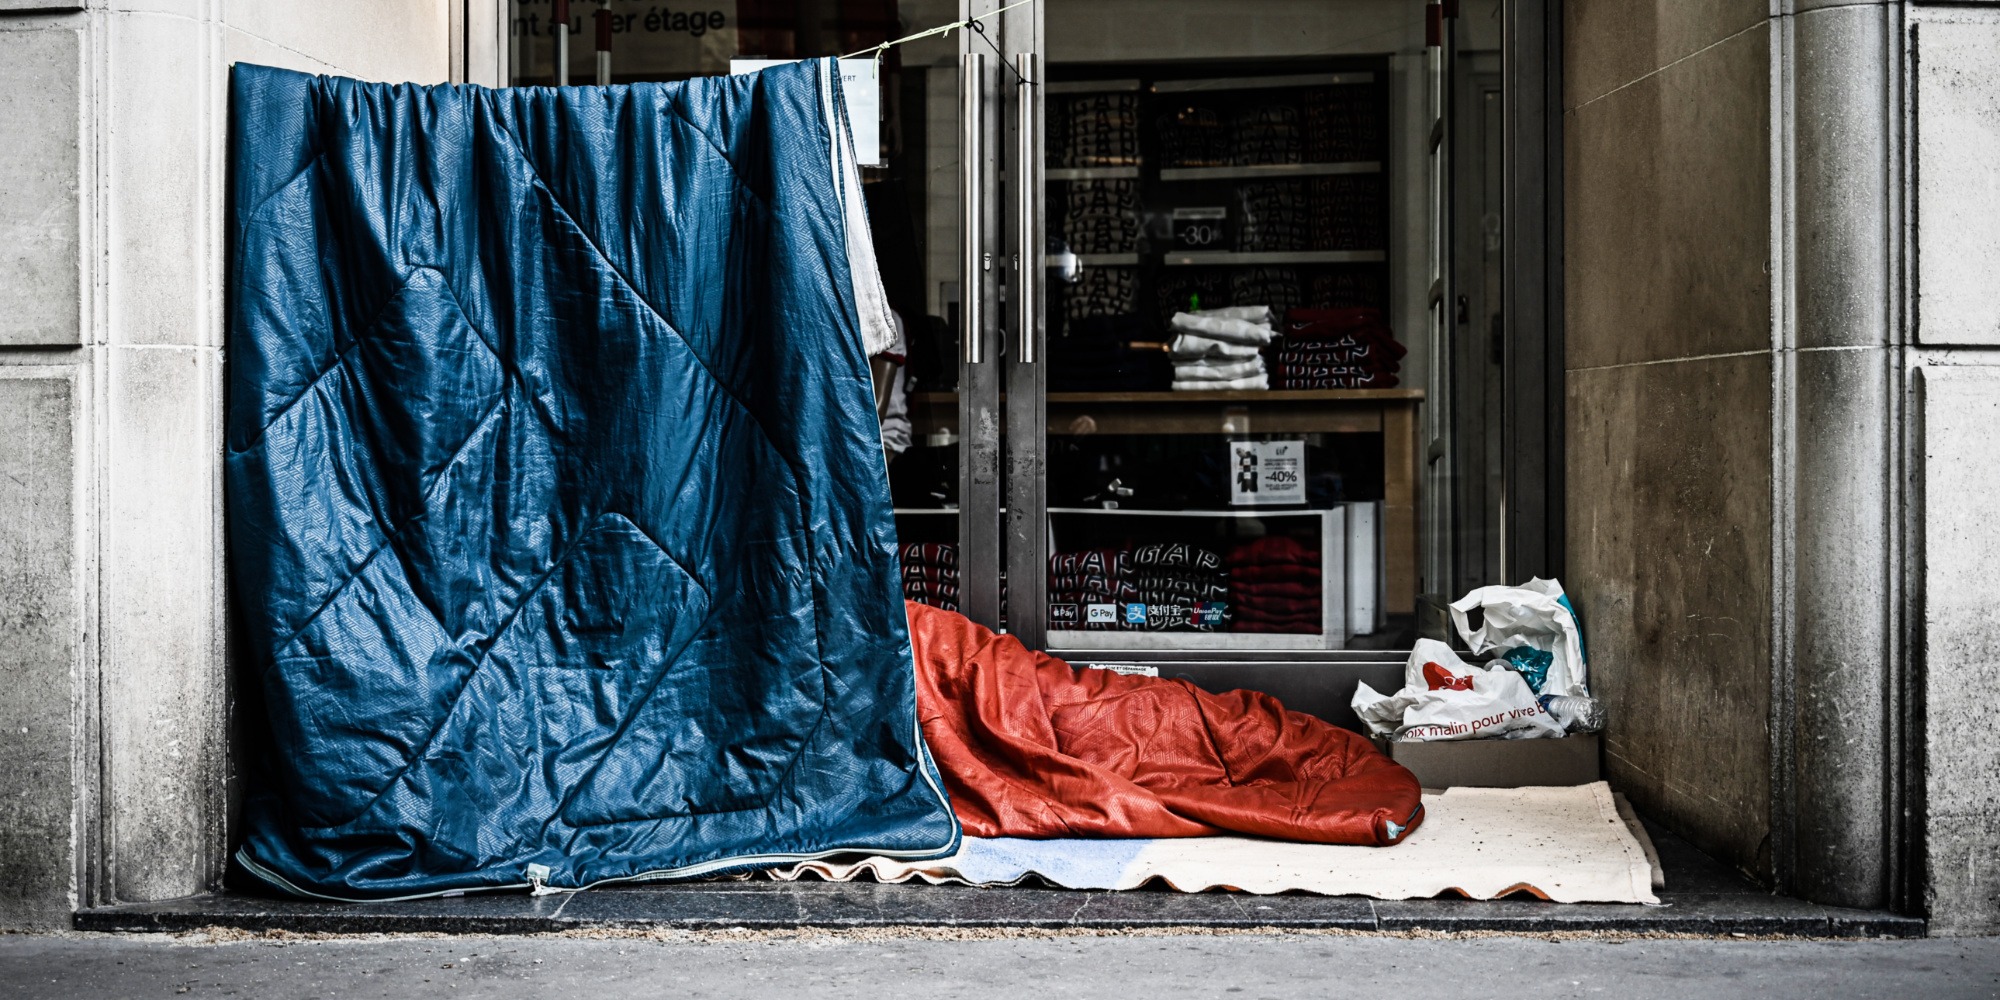 The number of homeless people in France increased by 130 in 10 years